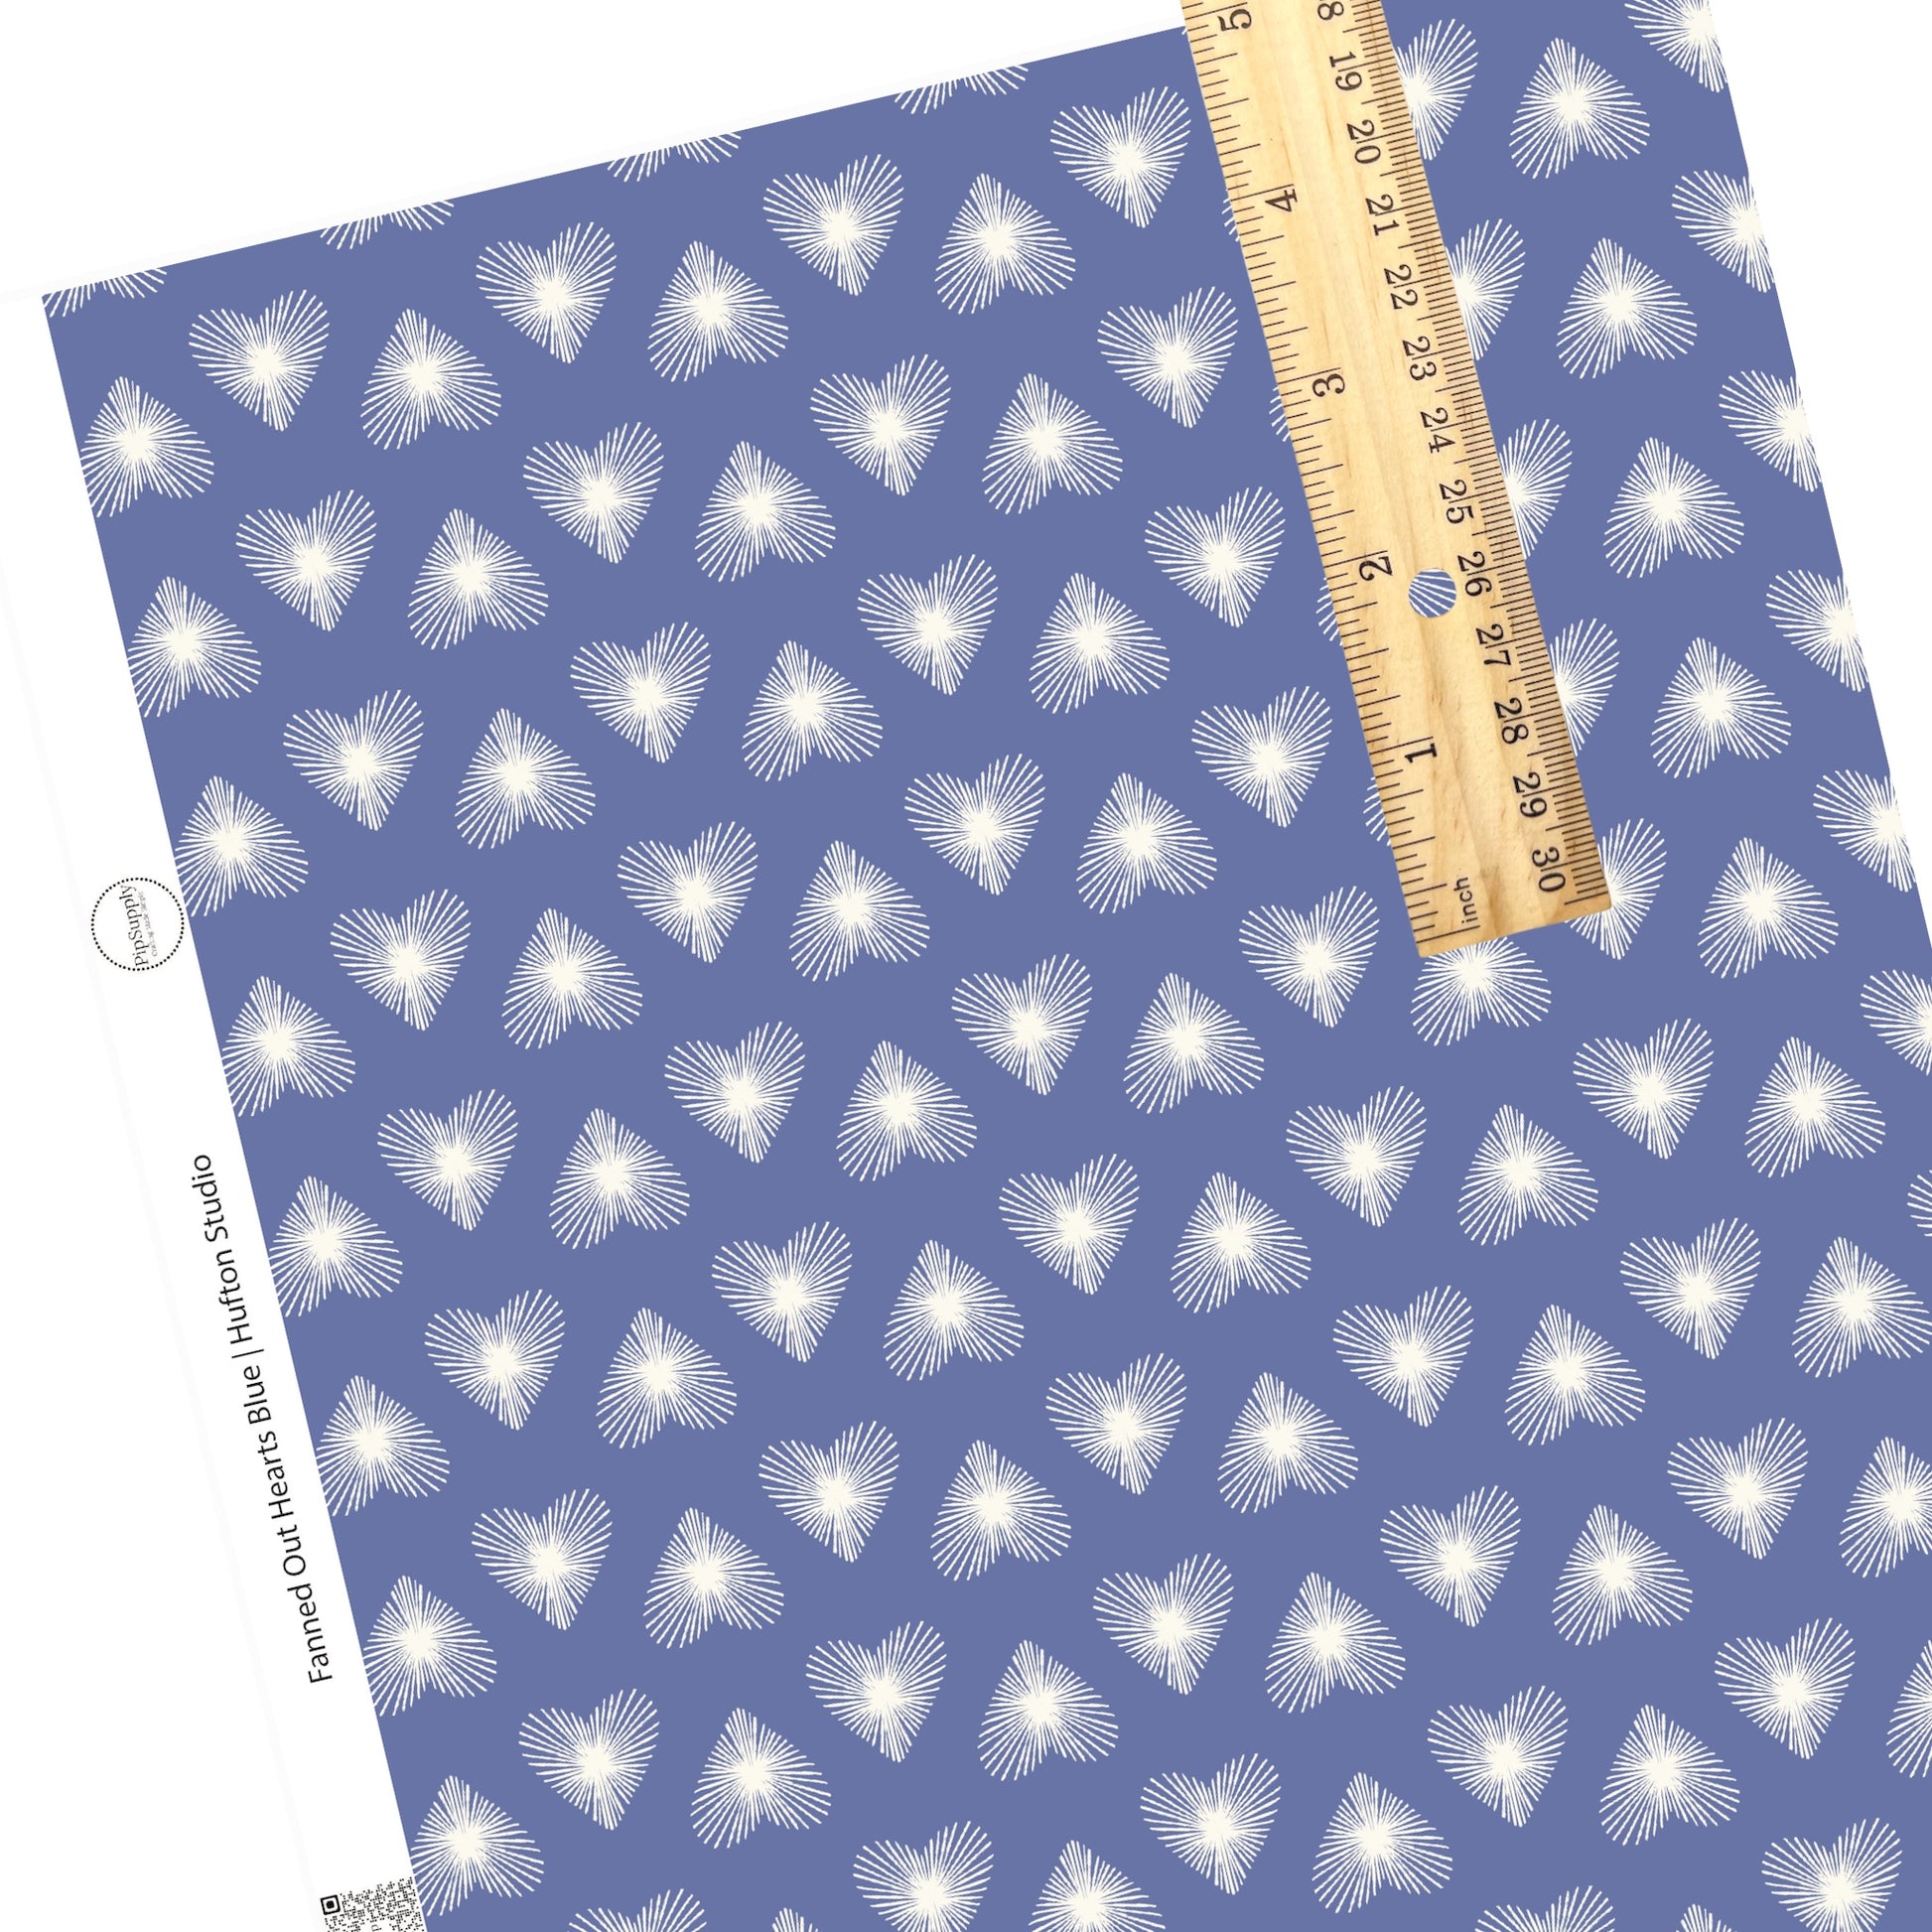 Scattered lined hearts in white on blue faux leather sheet